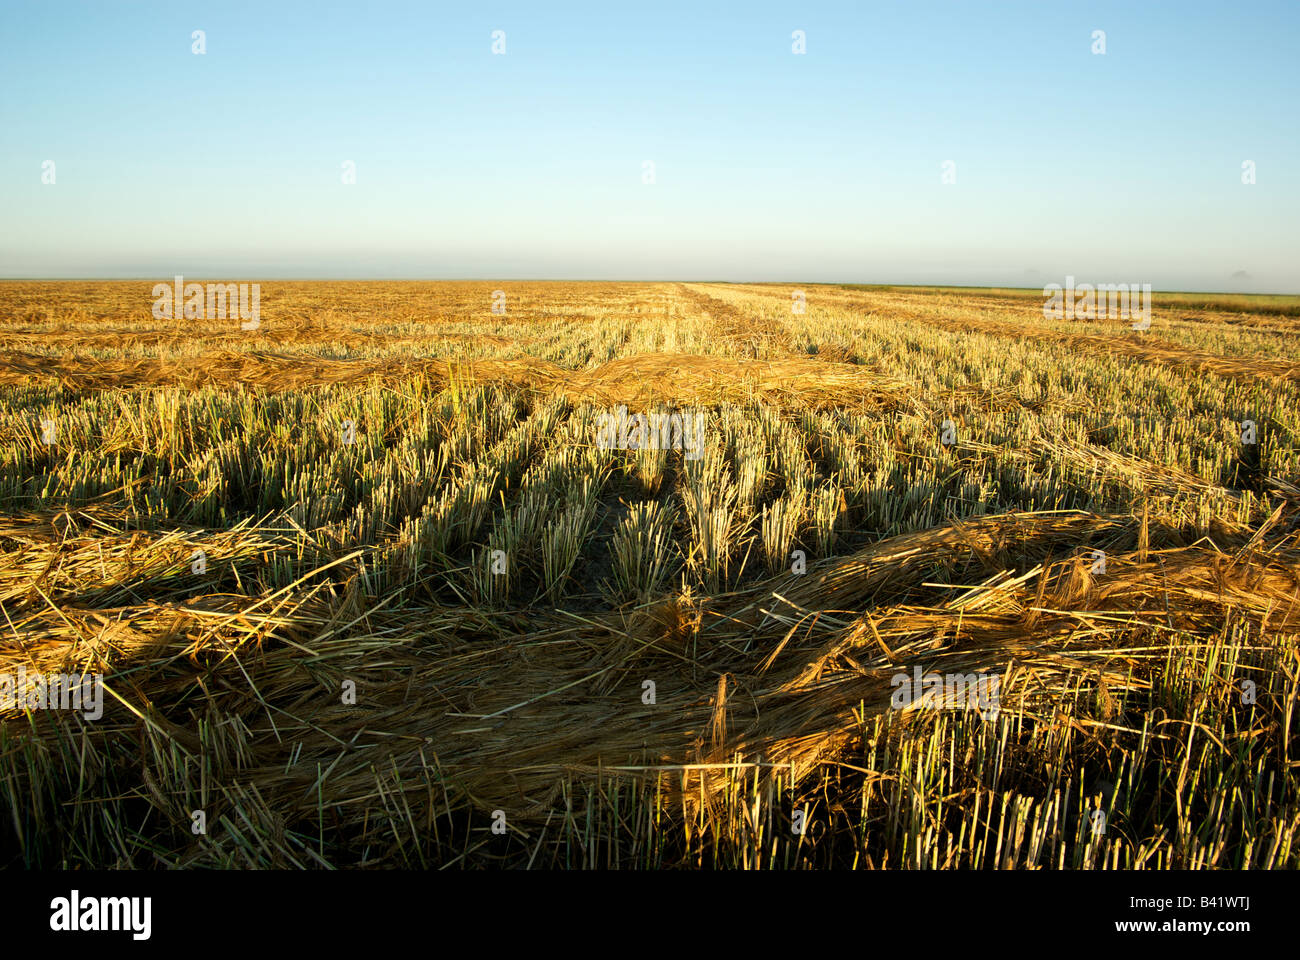 Rows of swathed cut barley awaiting combining Stock Photo